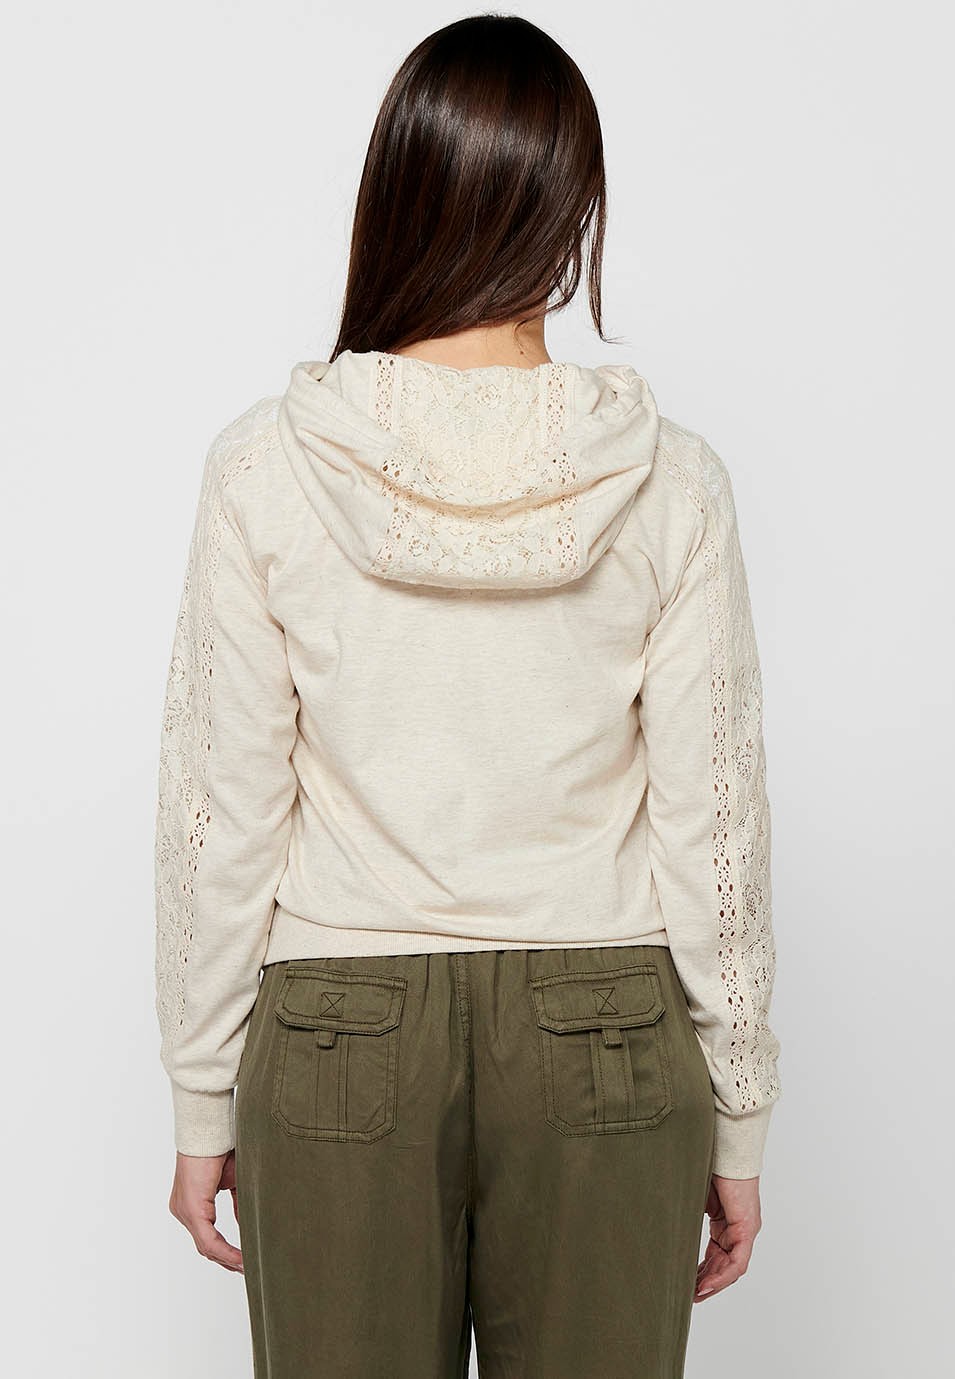 Jacket Sweatshirt with Front Zipper Closure with Lace Details and Stone Color Hooded Collar for Women 3